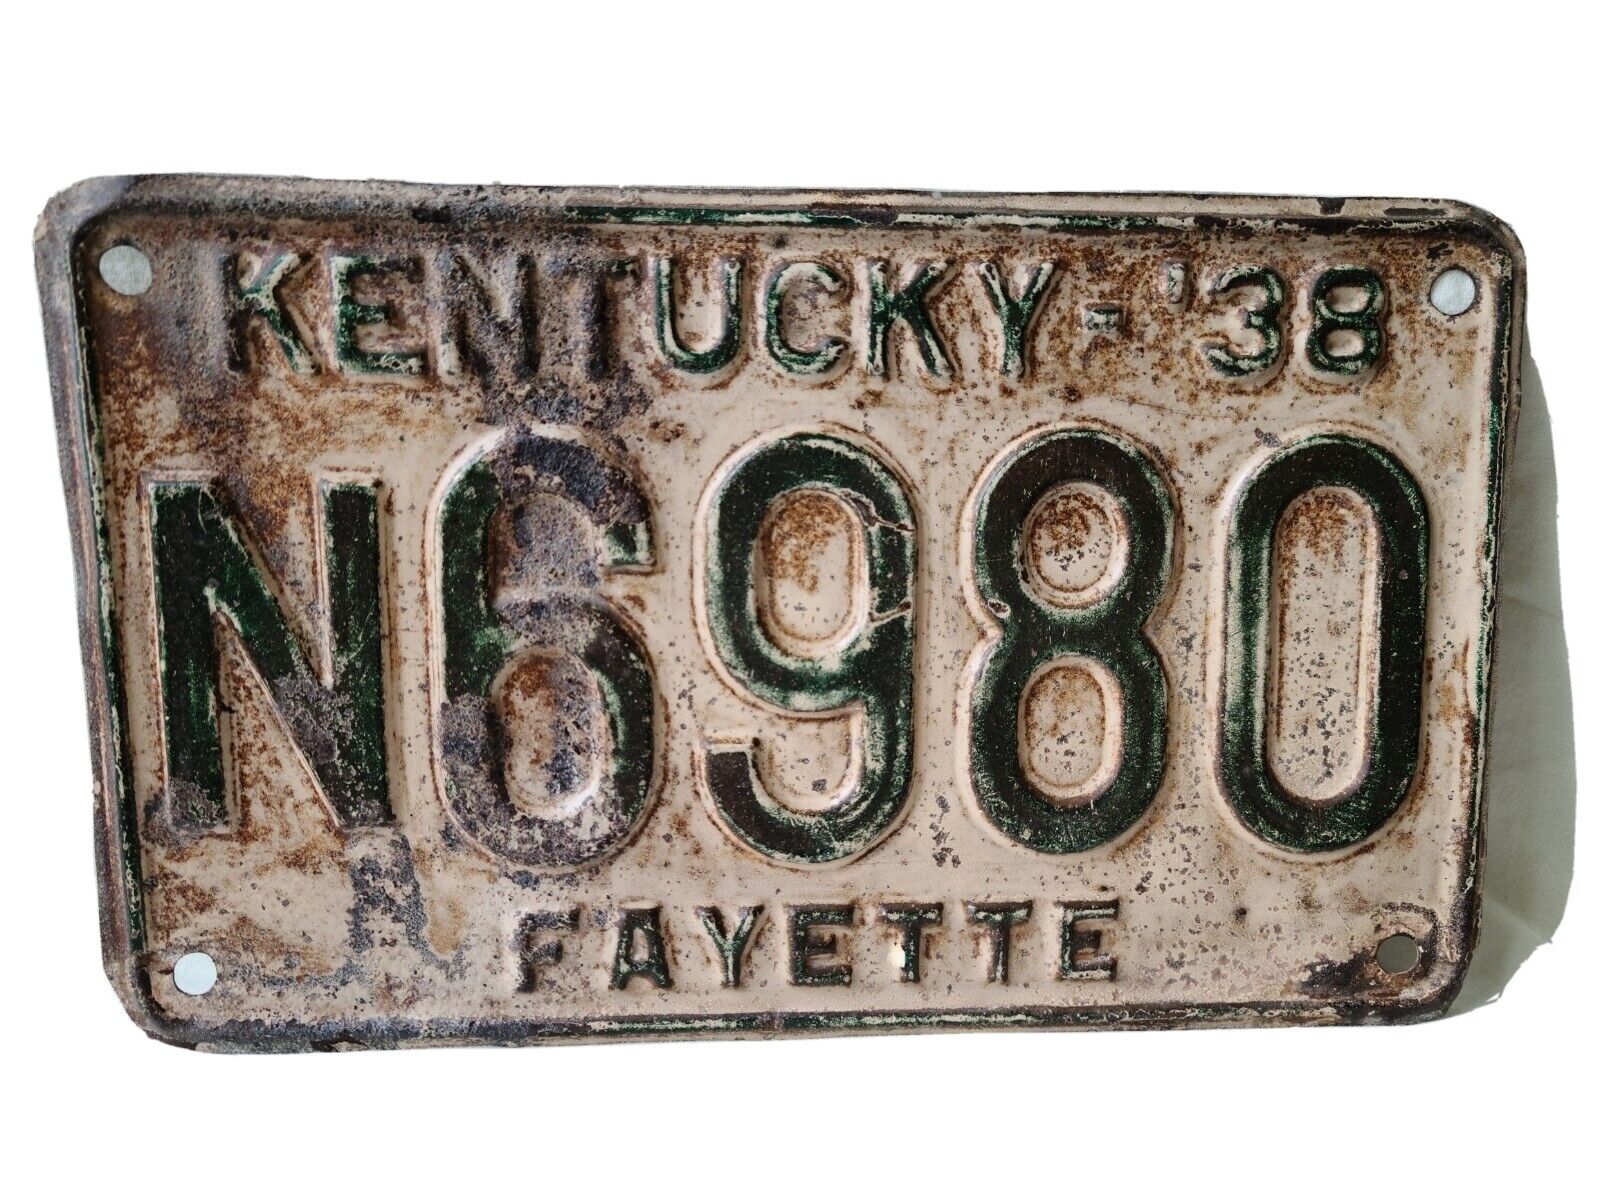 Vintage 1938 Kentucky Fayette County License Plate